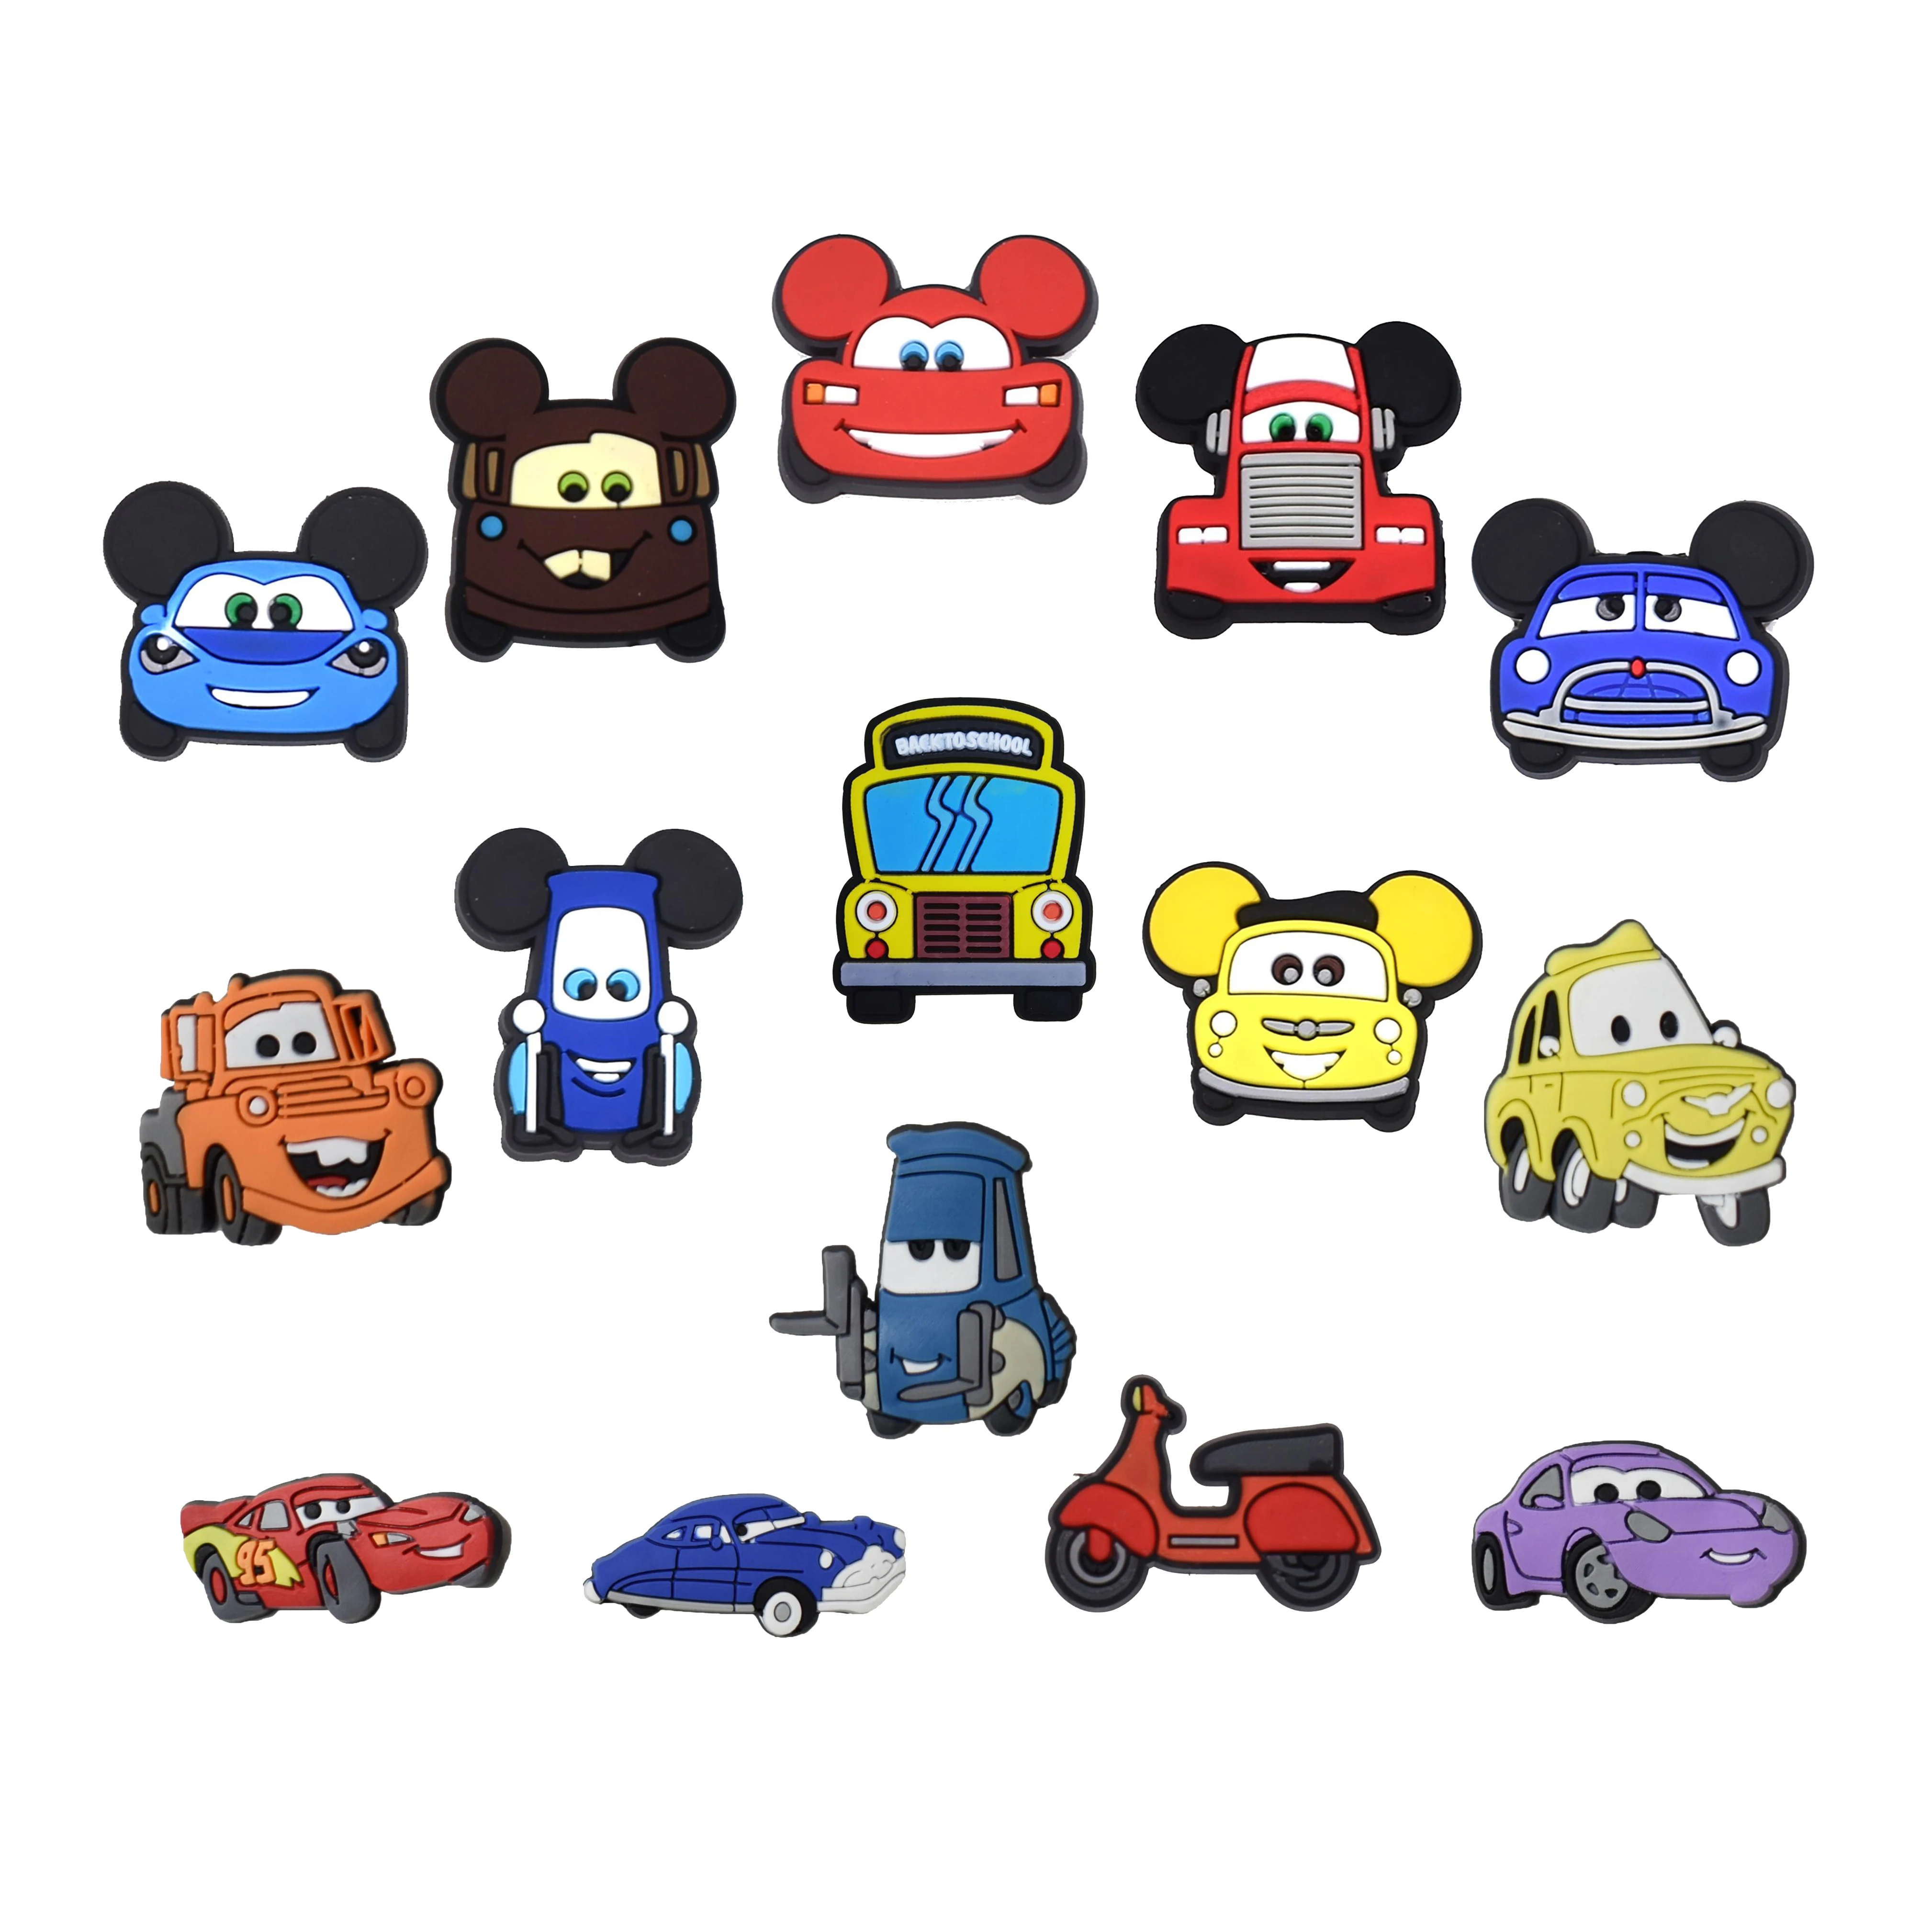 

2000Pcs style cartoon cars shoe charms Pvc Shoes Accessories clog Jibz fit for Wristband Croc Decorations, As pictures show